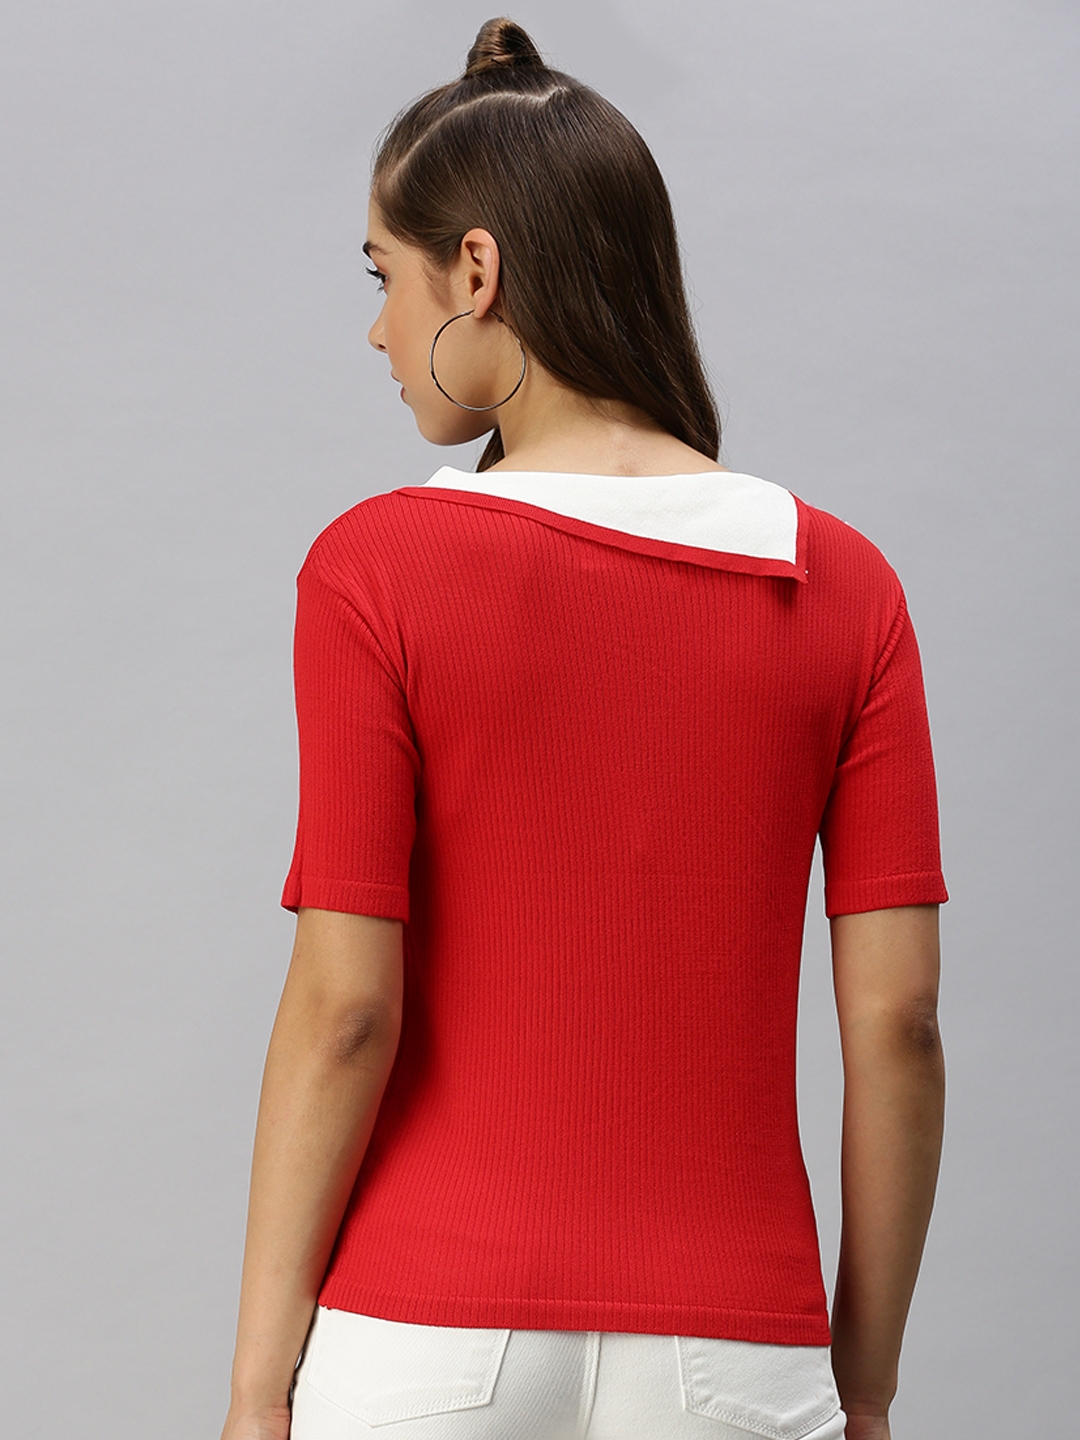 Women's Red Cotton Blend Solid Tops